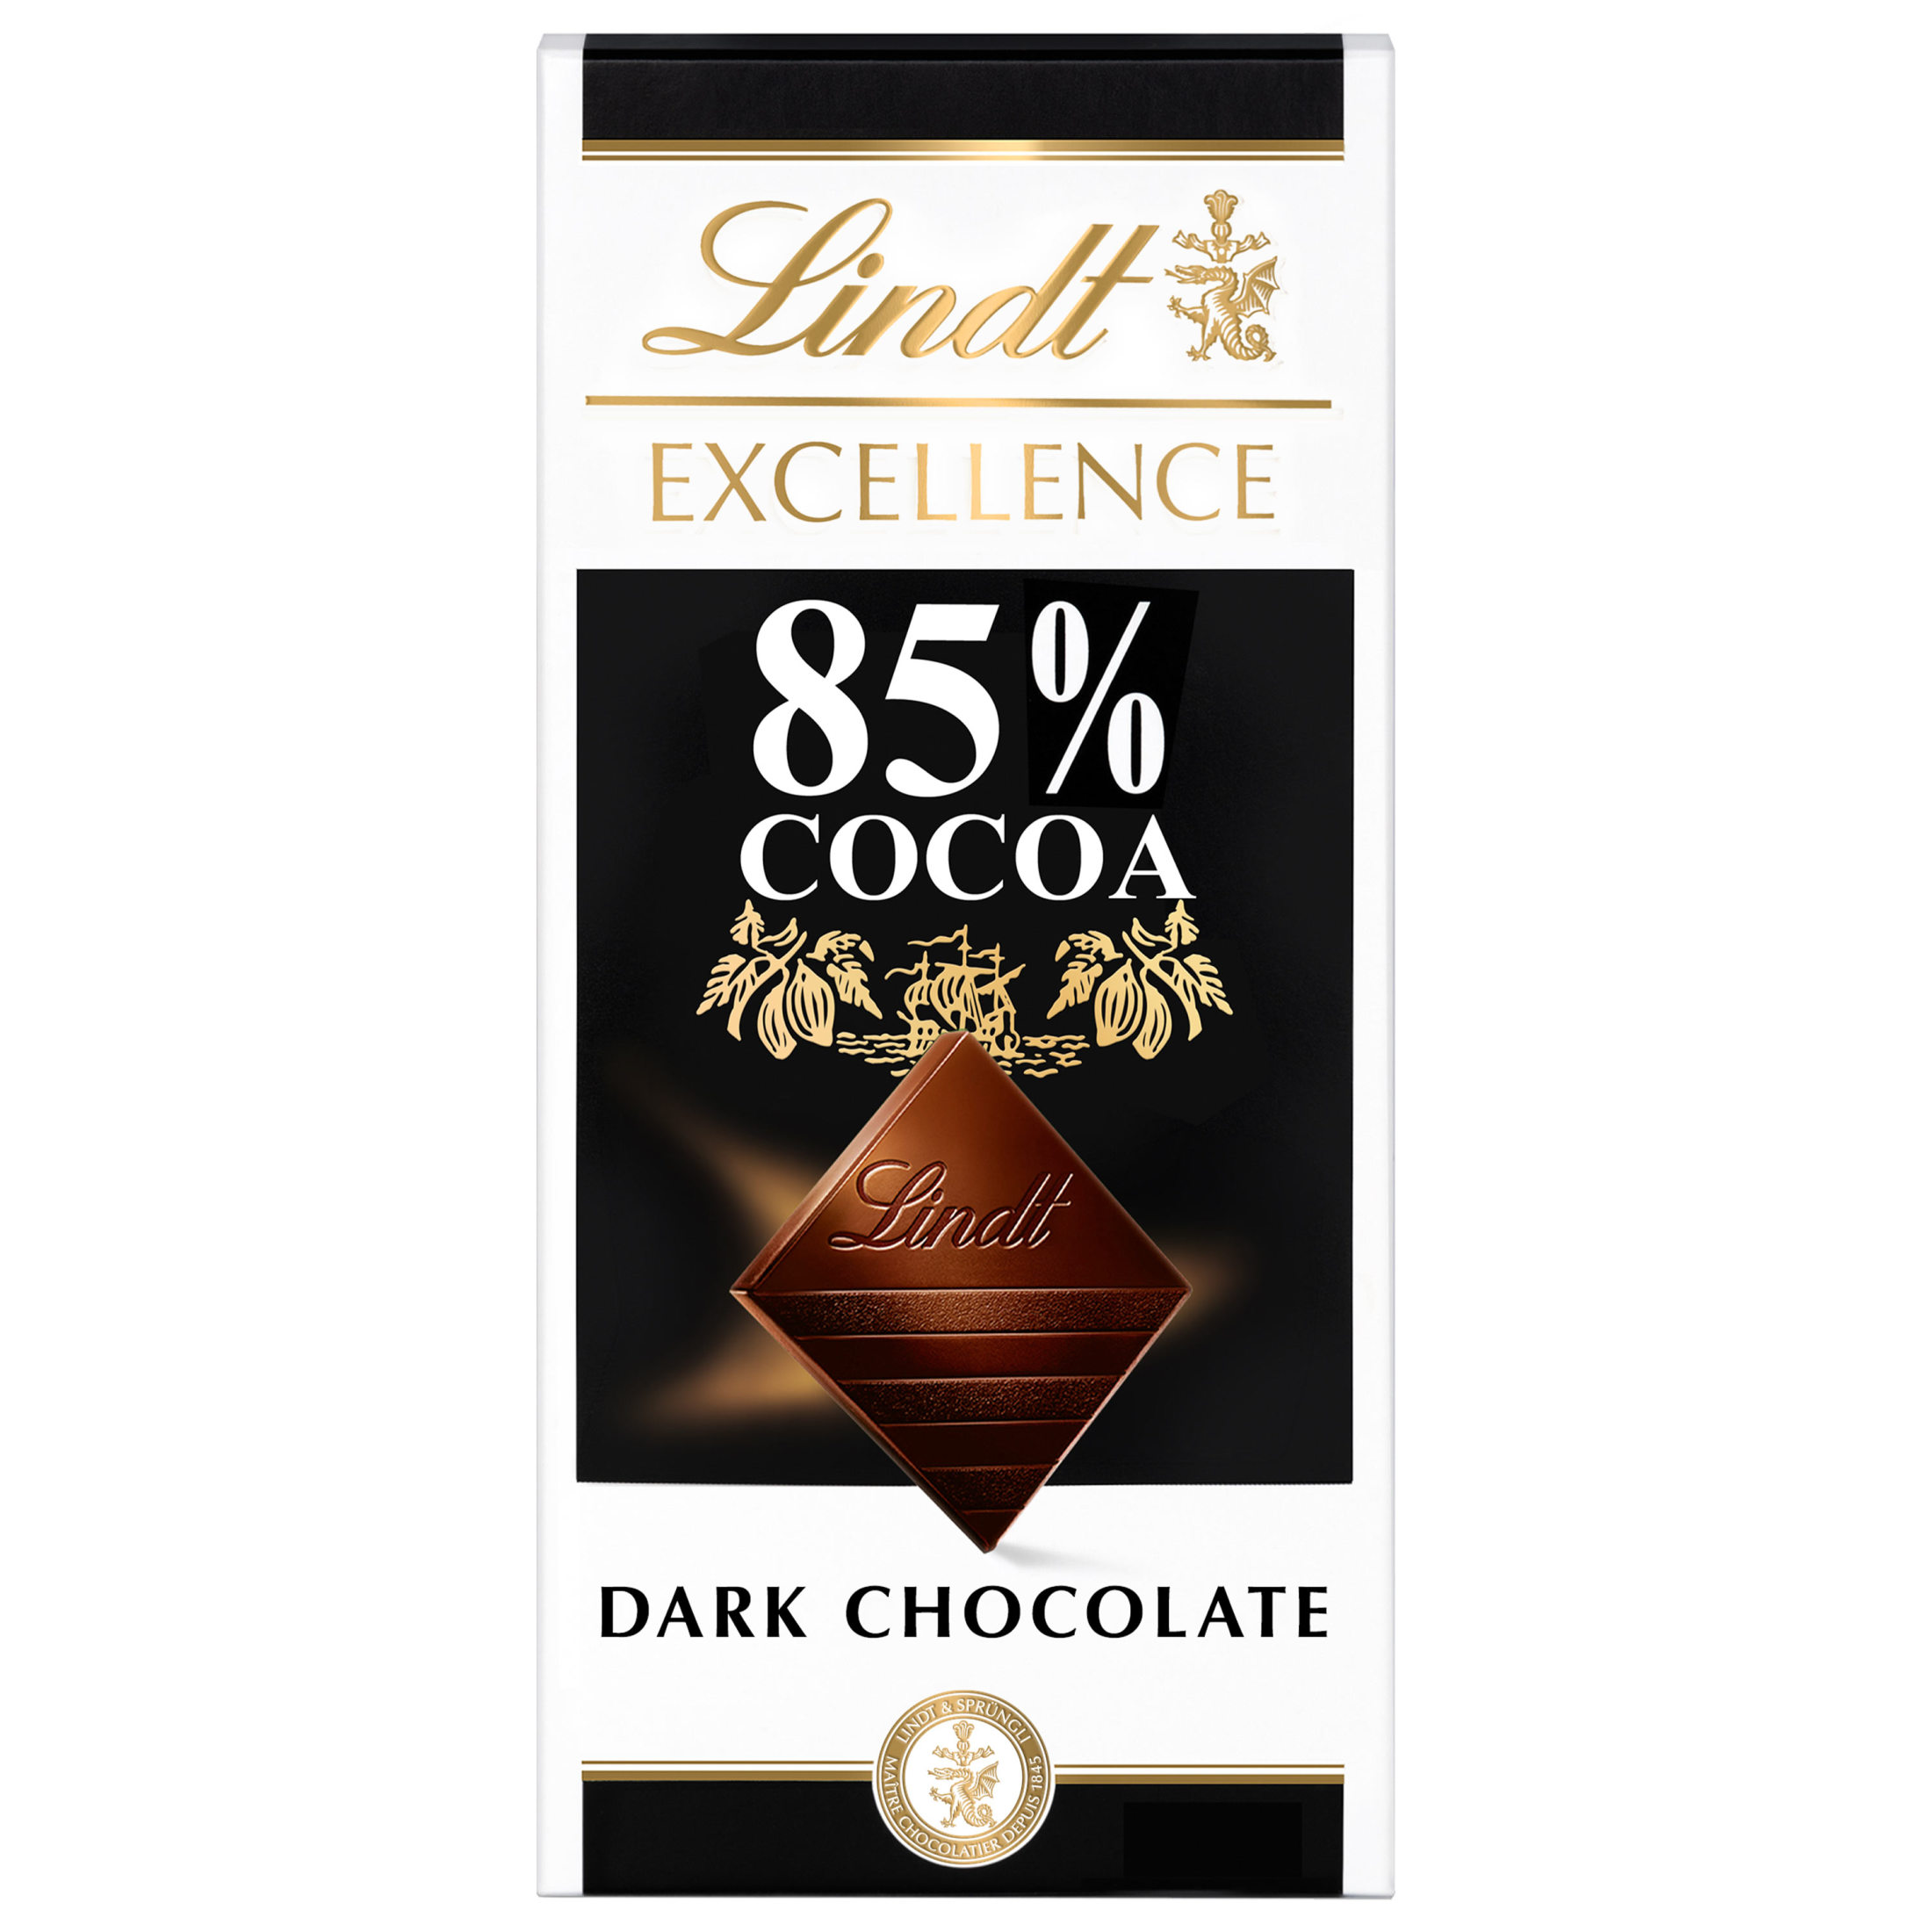 Lindt Excellence 85% Cocoa Dark Chocolate Candy Bar, 3.5 oz. Bar - image 1 of 16